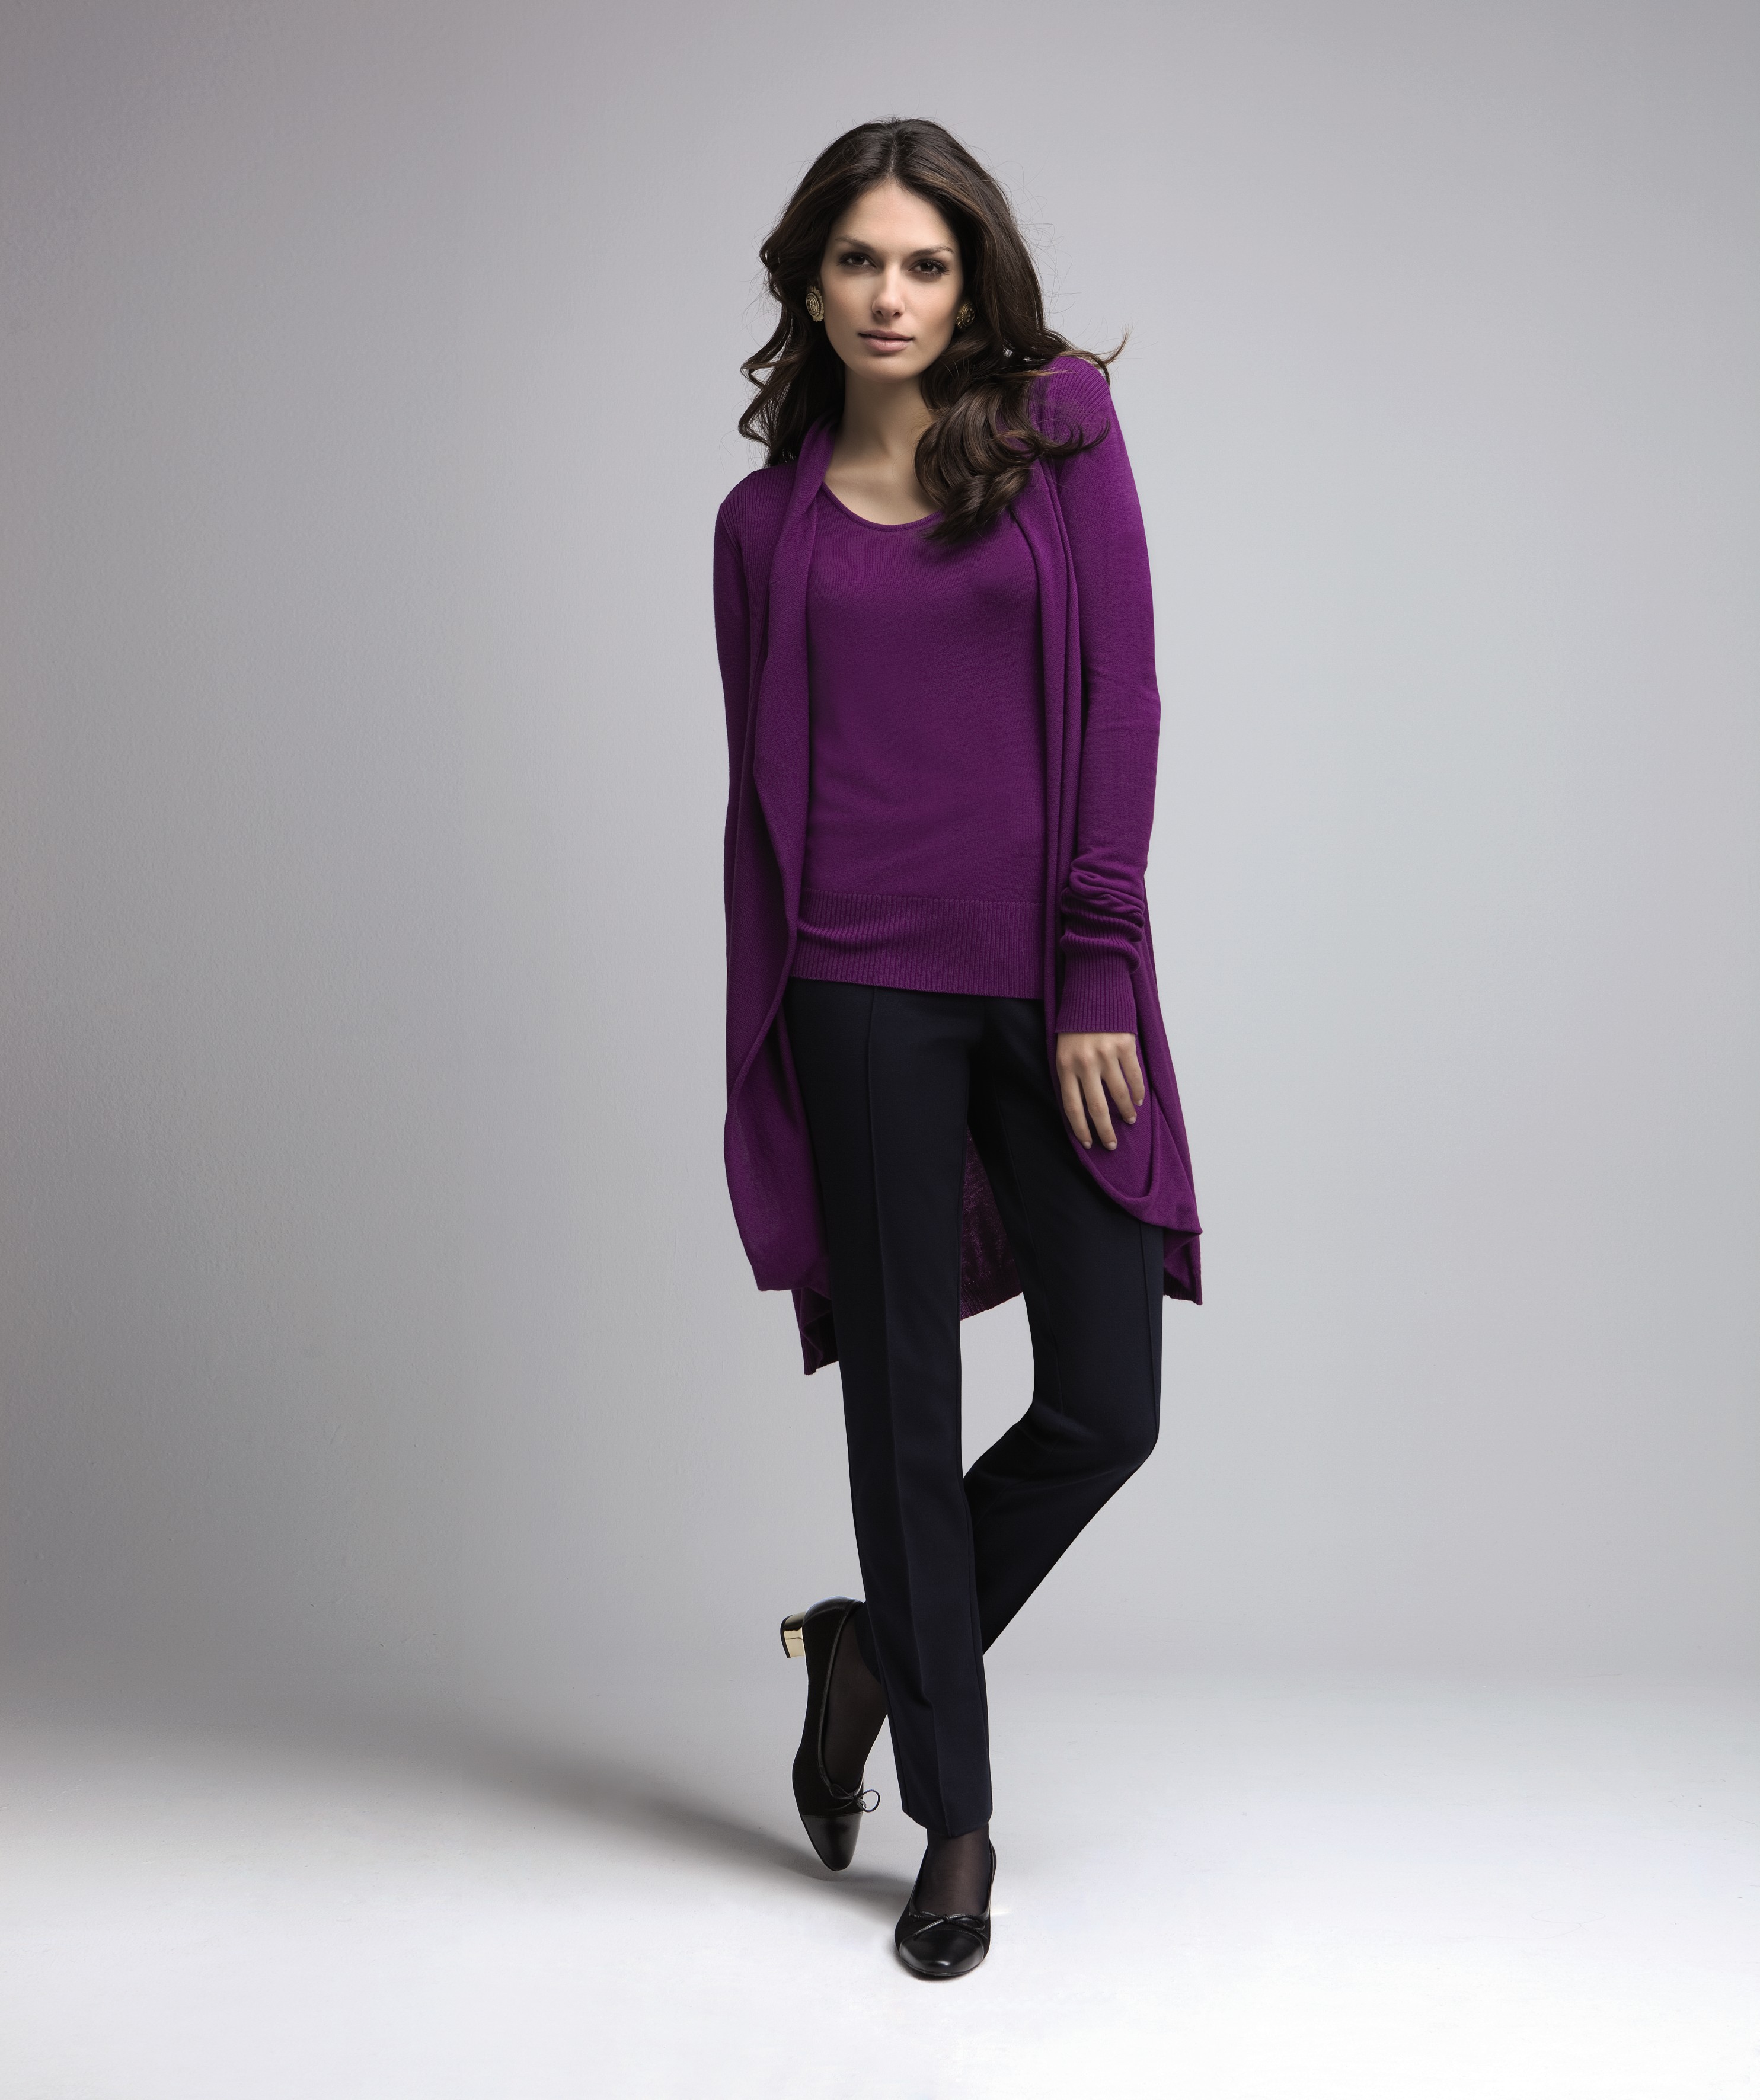 Elgance AW 2011 Collection 13